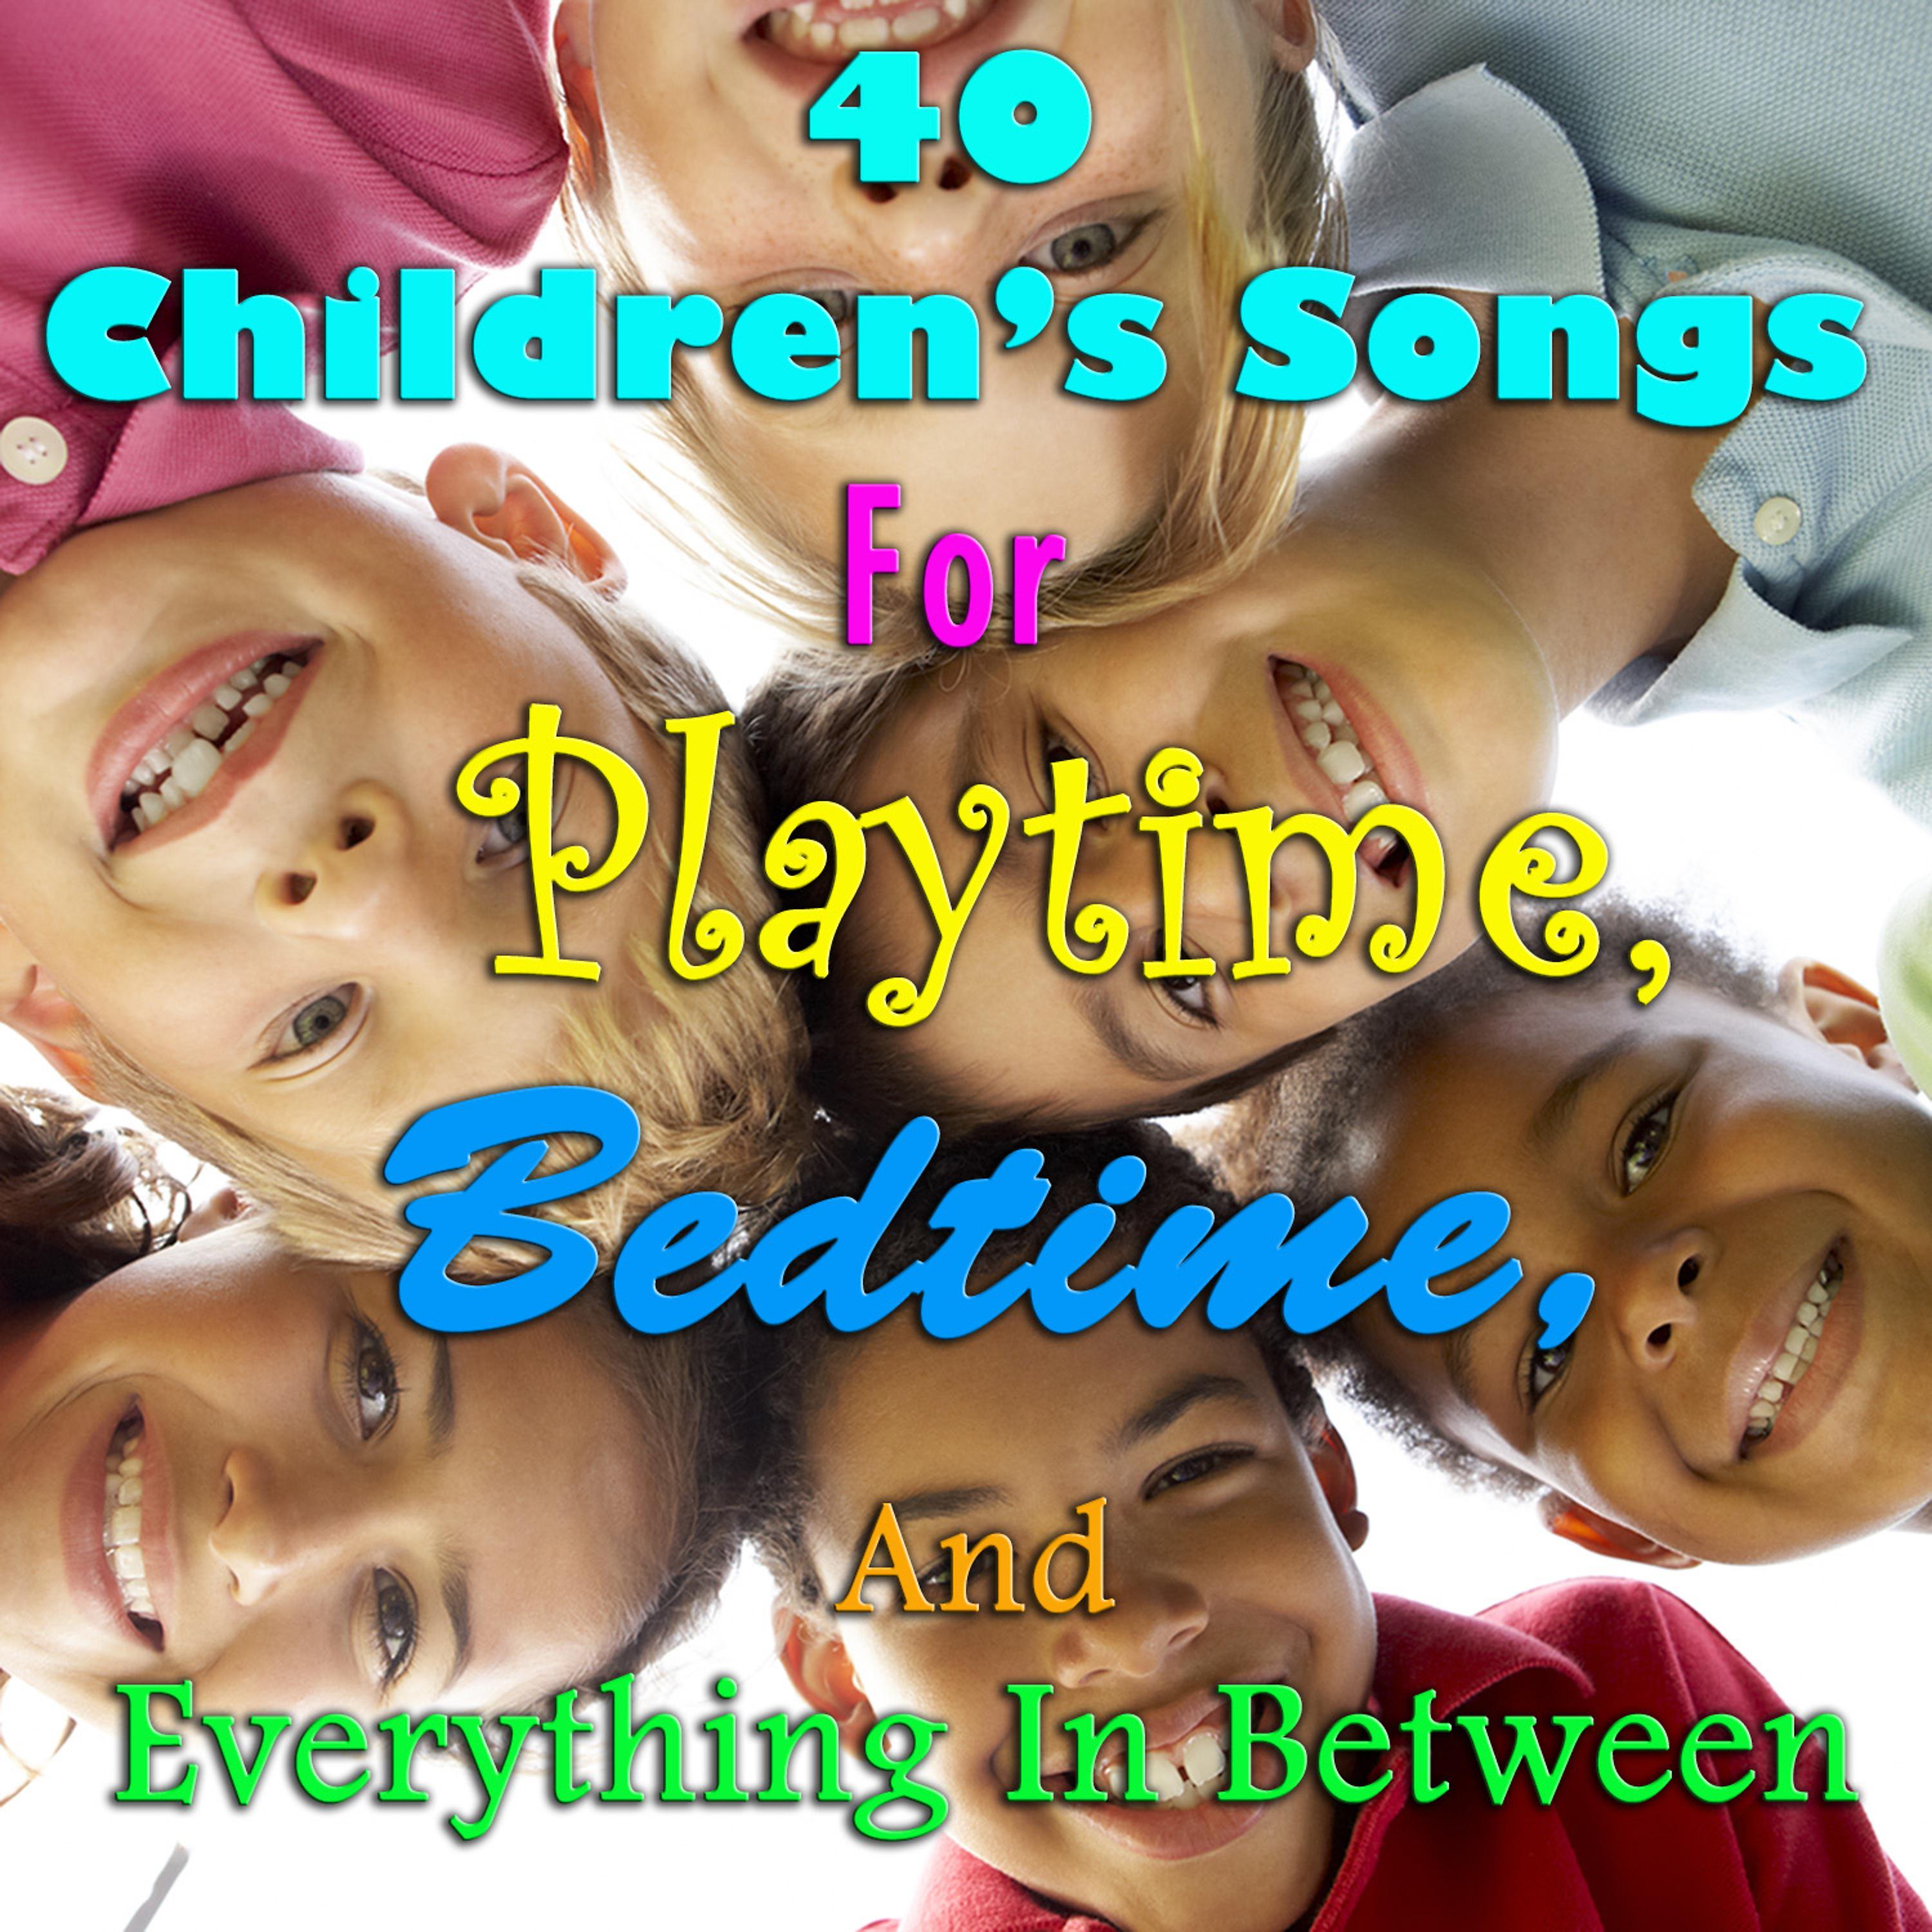 Постер альбома 40 Children's Songs for Playtime, Bedtime, And Everything in Between